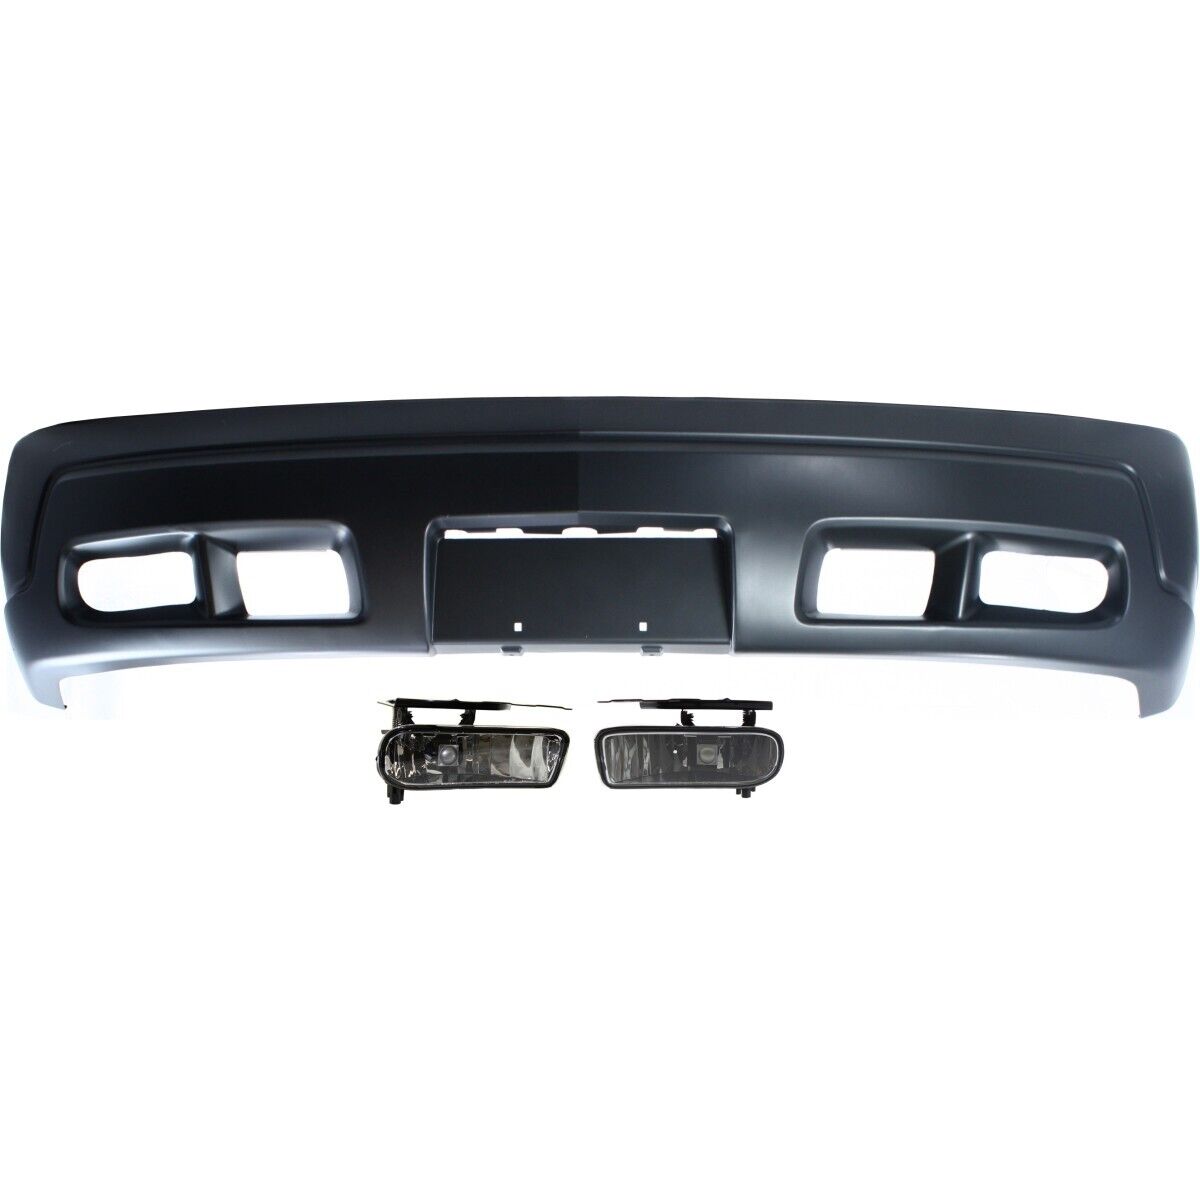 Bumper Cover Kit For 2002-2006 Cadillac Escalade Front